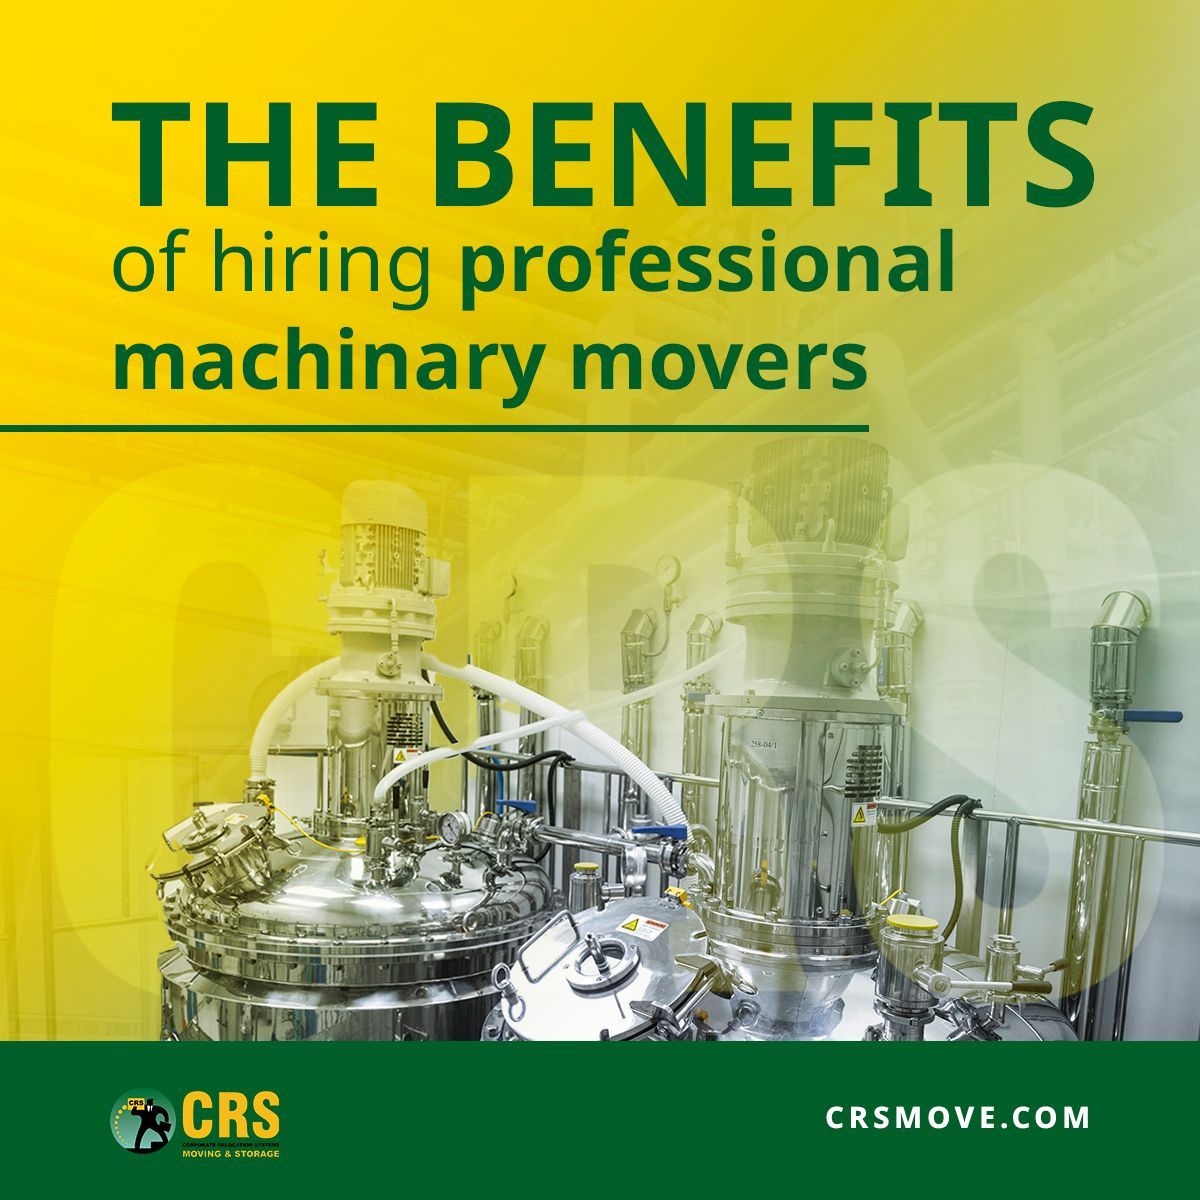 Moving professional equipment requires attention to detail, advanced skills, and diligent planning. Learn about how CRS Moving & Storage can help you move your heavy machinery: buff.ly/3U9WEg5 

#OfficeLiquidation #OfficeStorage #OfficeMove #NYCMovers #CorporateMovers